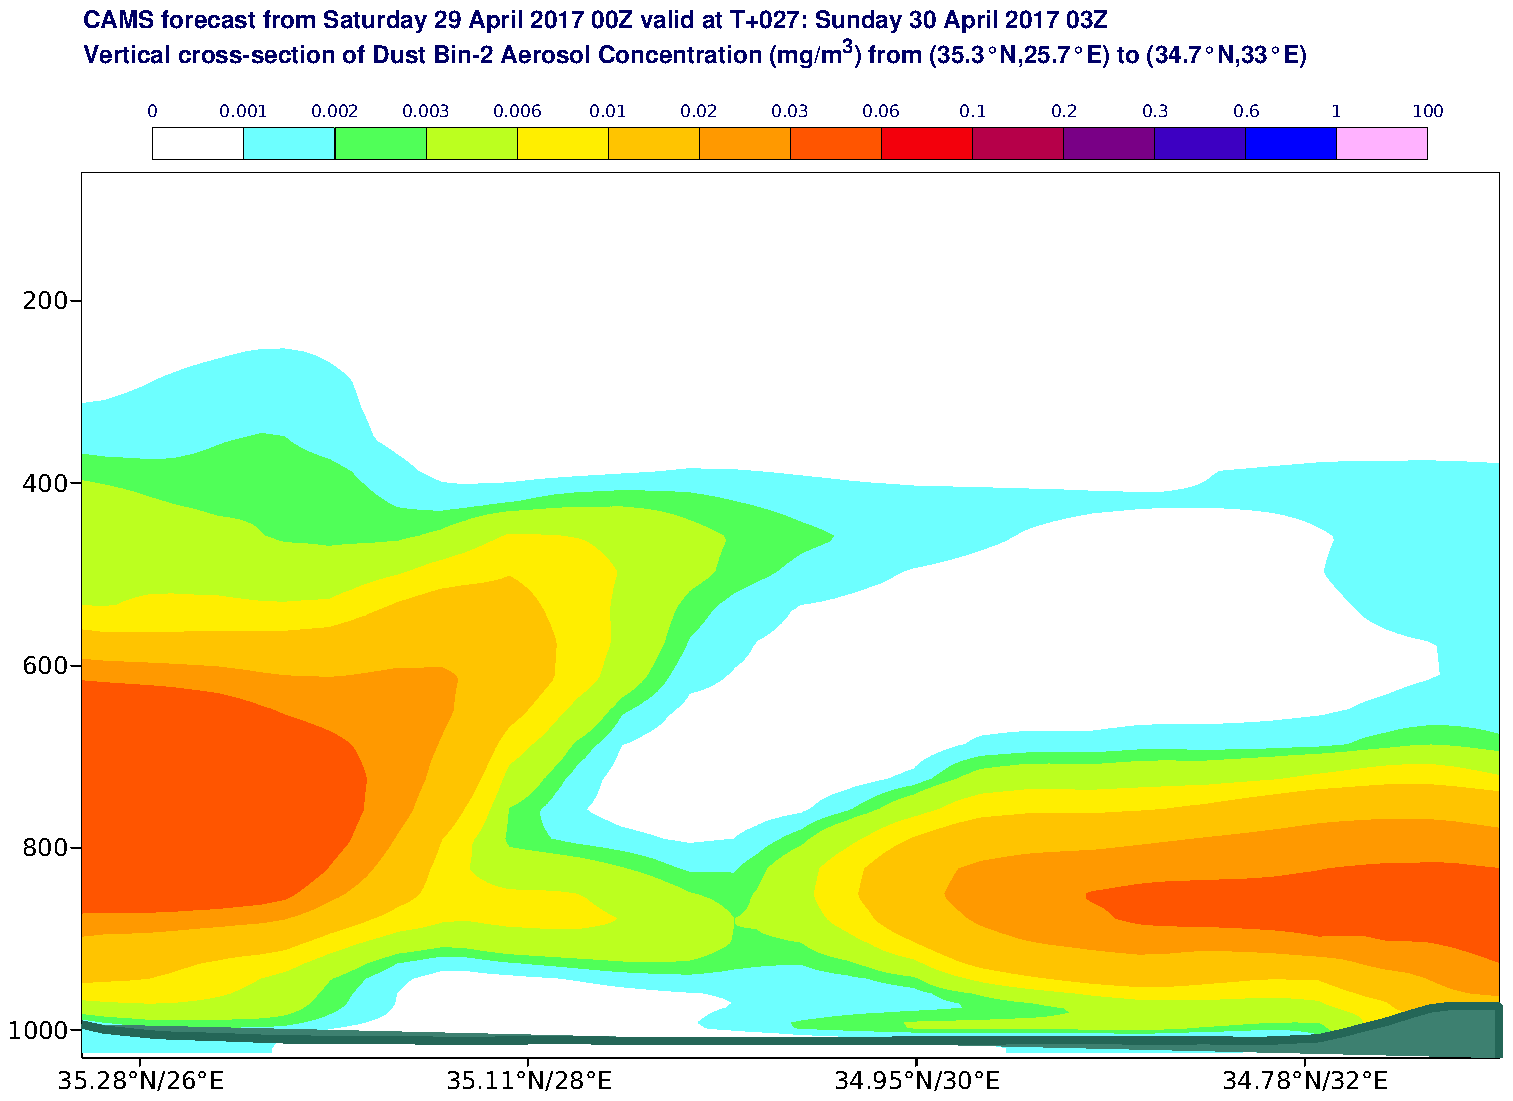 Vertical cross-section of Dust Bin-2 Aerosol Concentration (mg/m3) valid at T27 - 2017-04-30 03:00